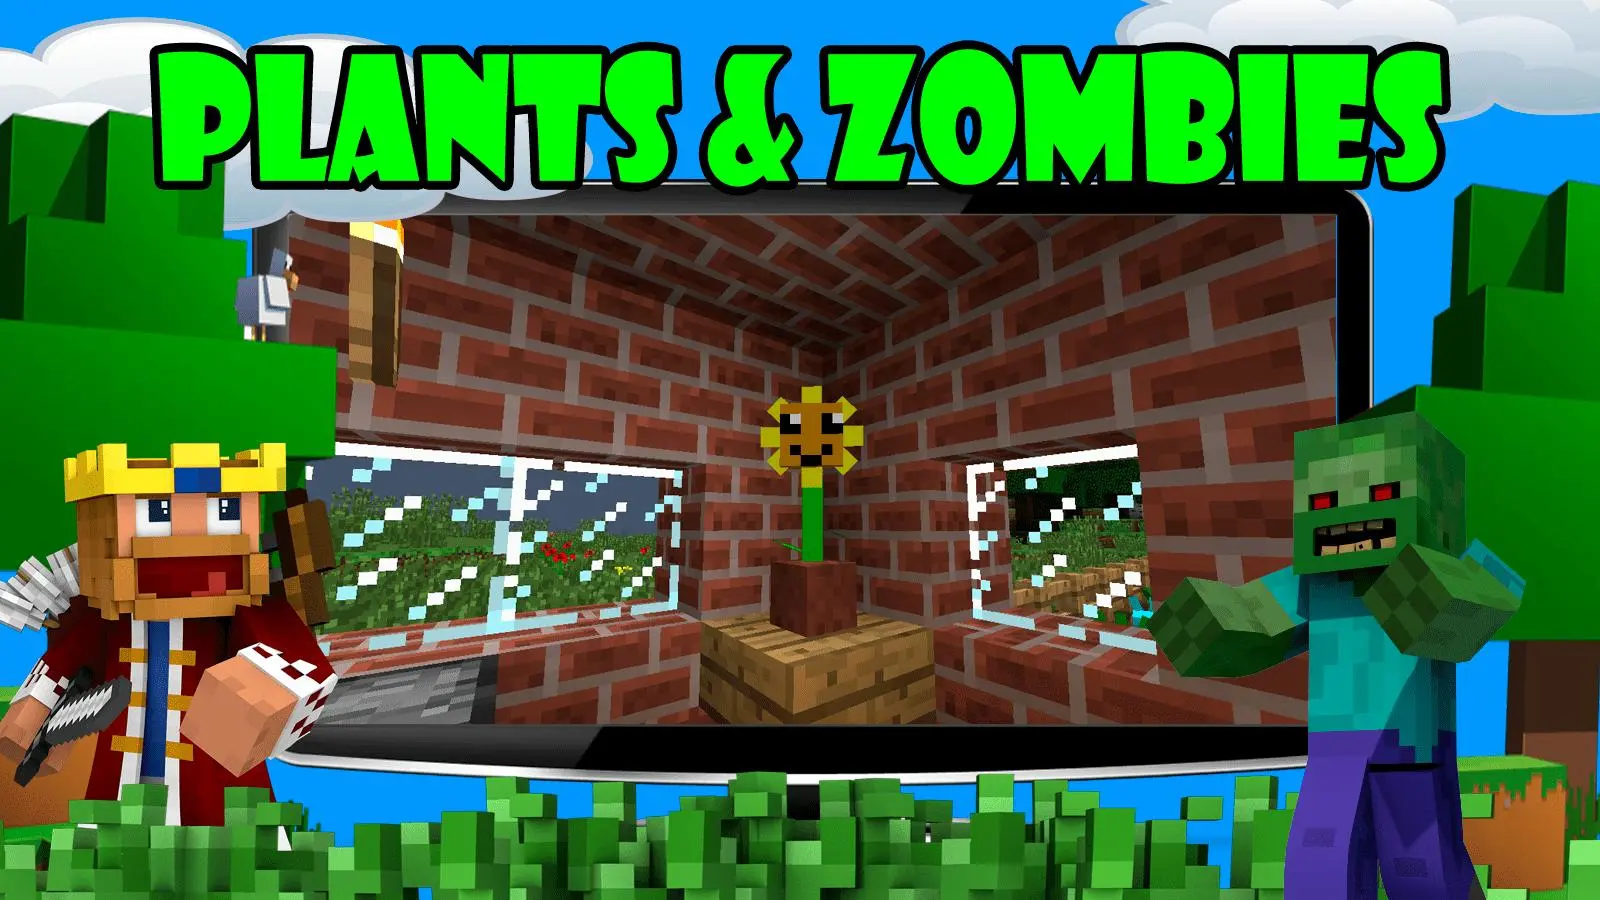 Mod flower vs zombie for Mcpe for Android - Download